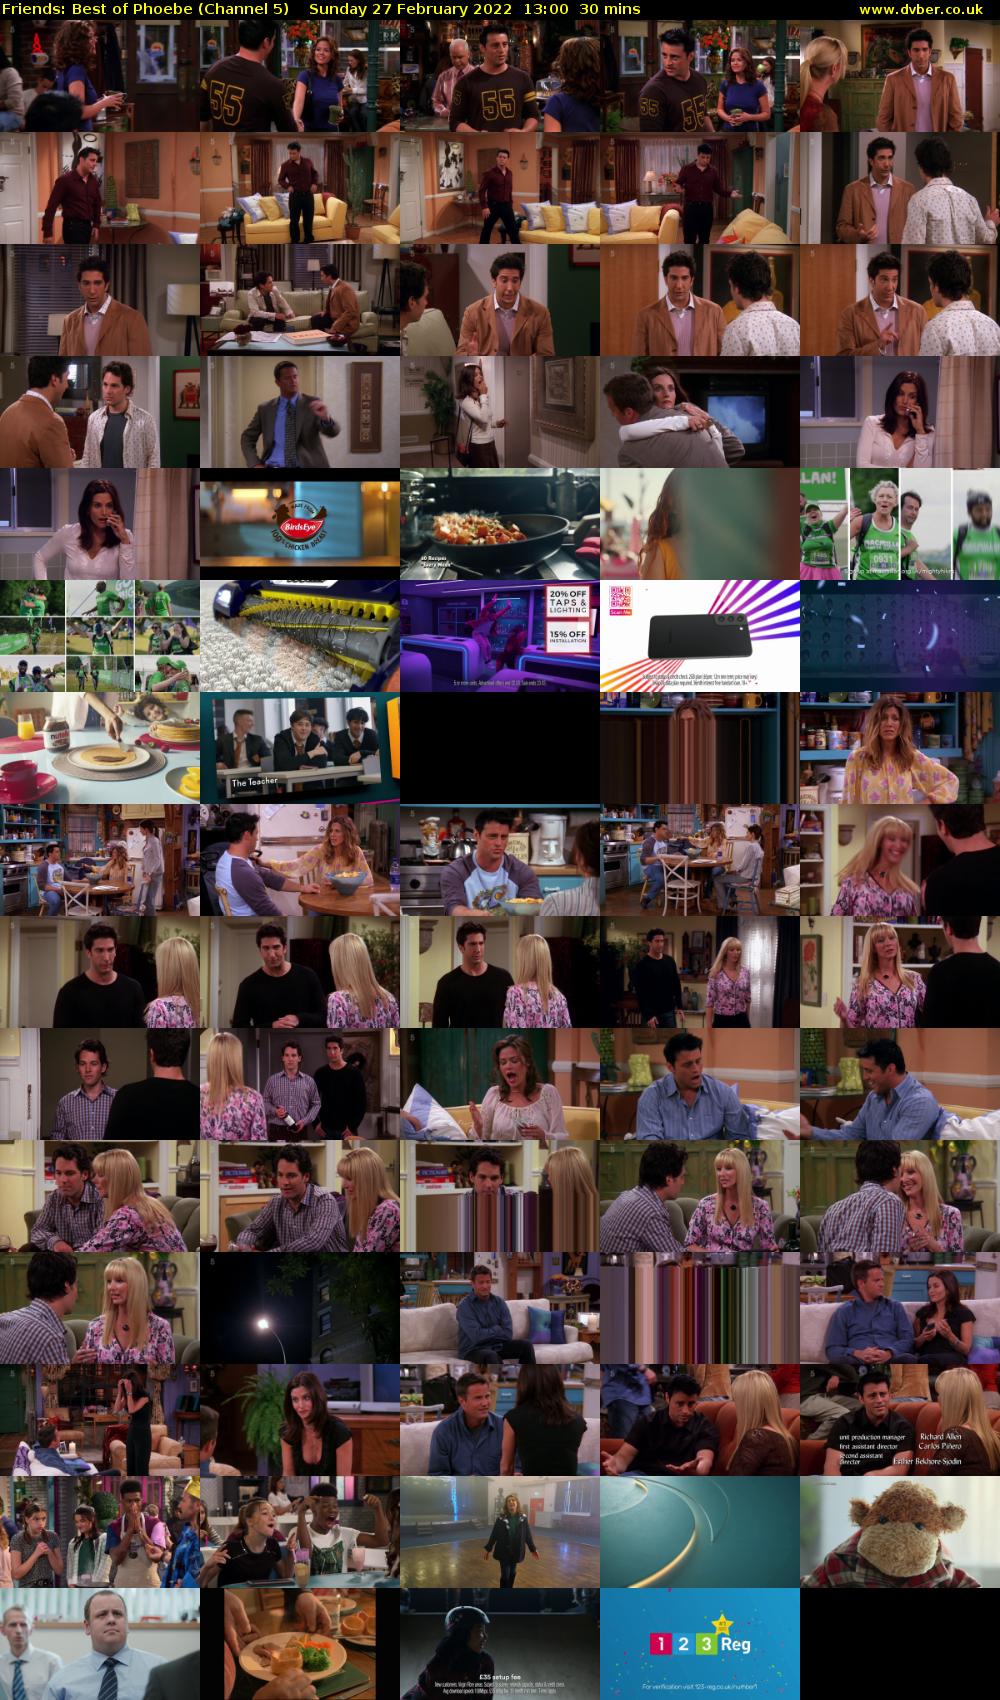 Friends: Best of Phoebe (Channel 5) Sunday 27 February 2022 13:00 - 13:30